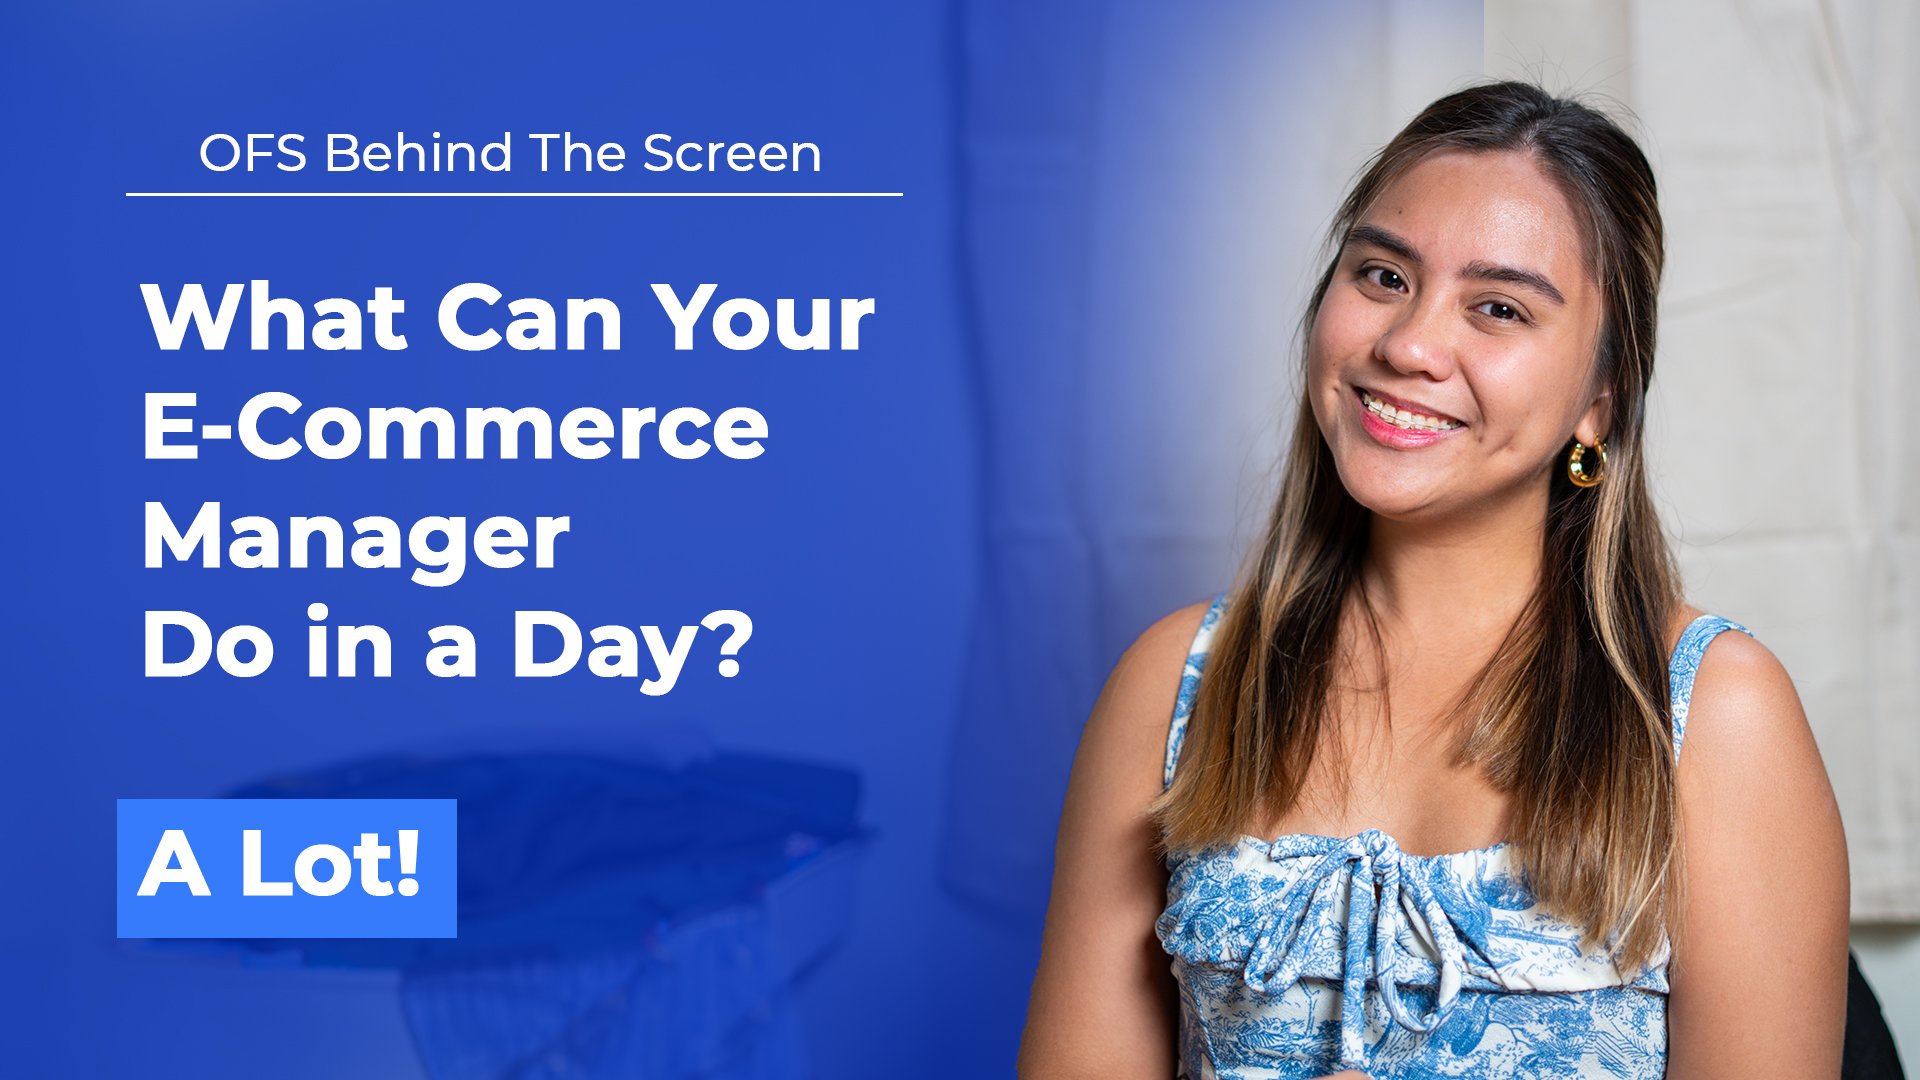 What Can Your E-Commerce Manager Do in a Day? A Lot!